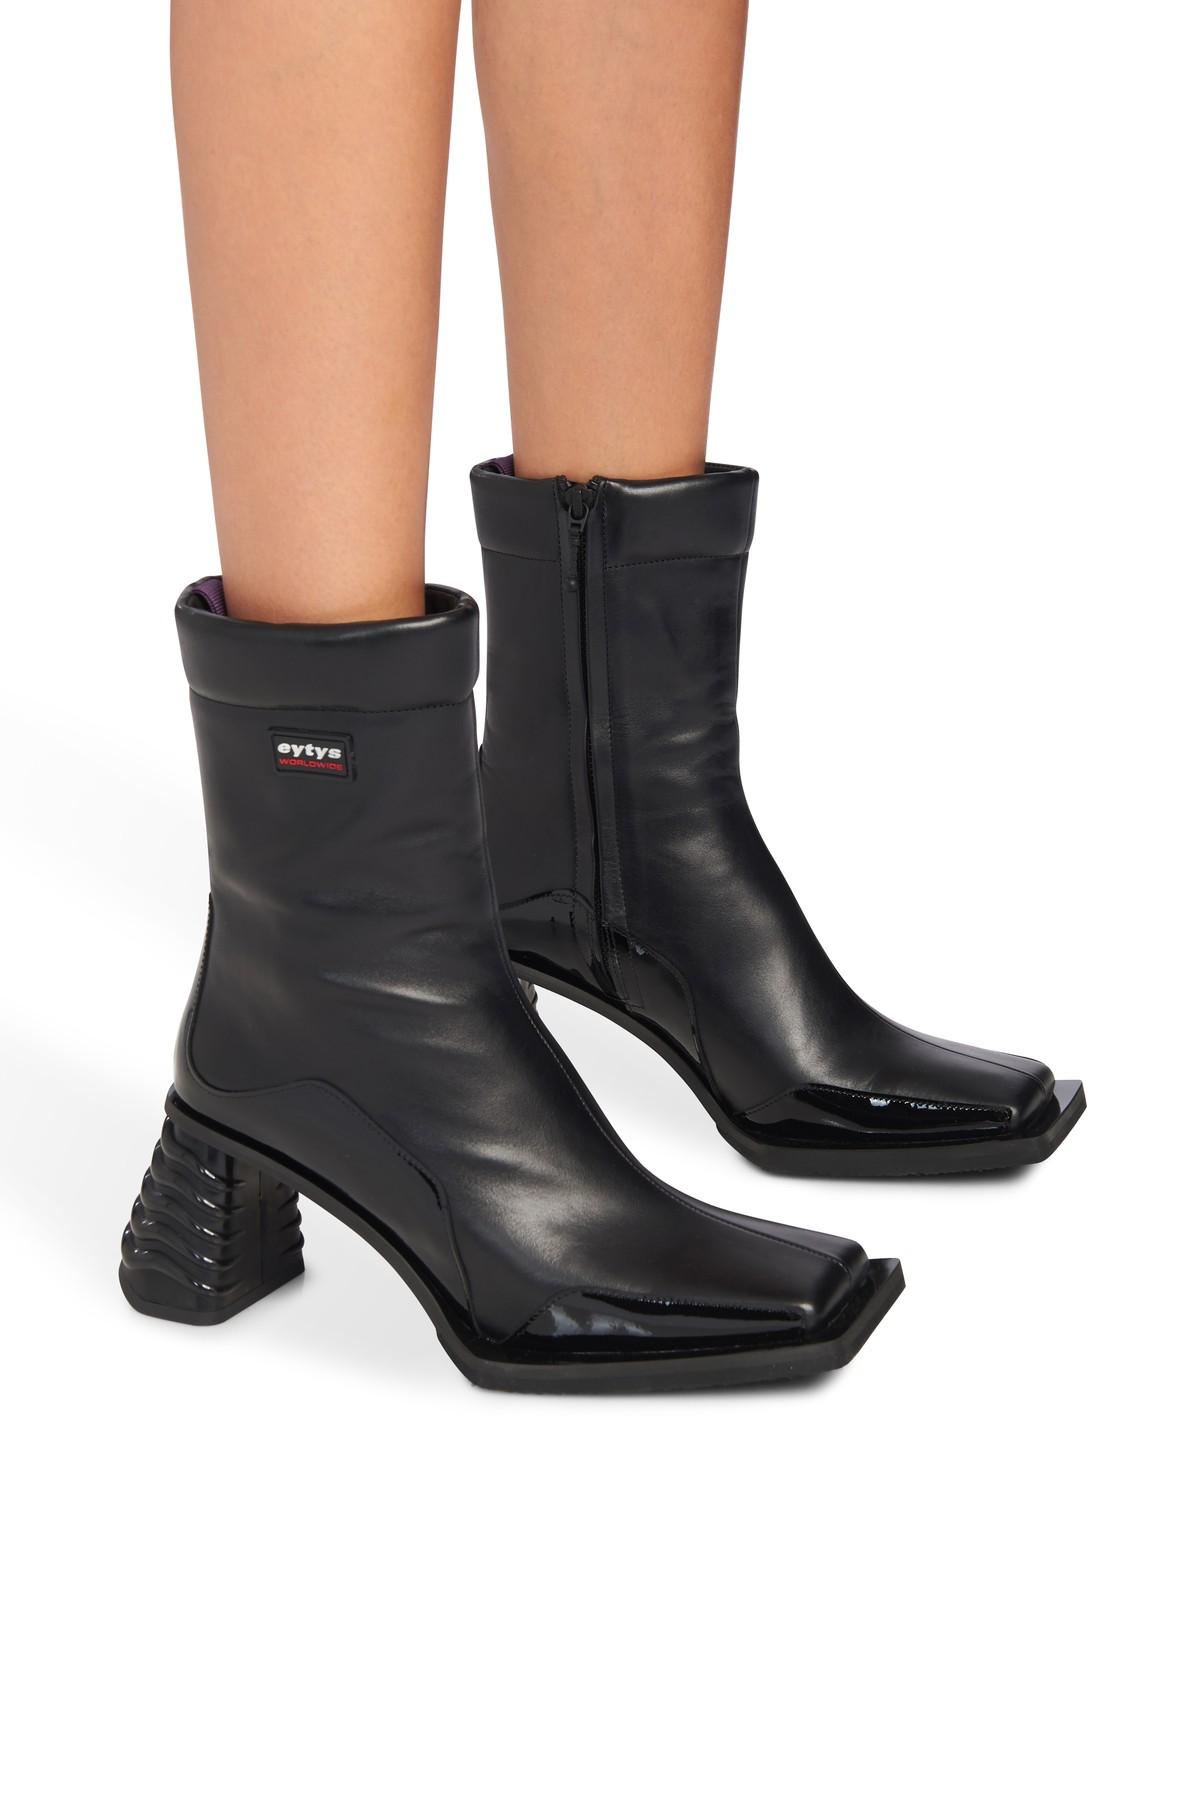 Eytys Gaia Ankle Boots in Black | Lyst Australia